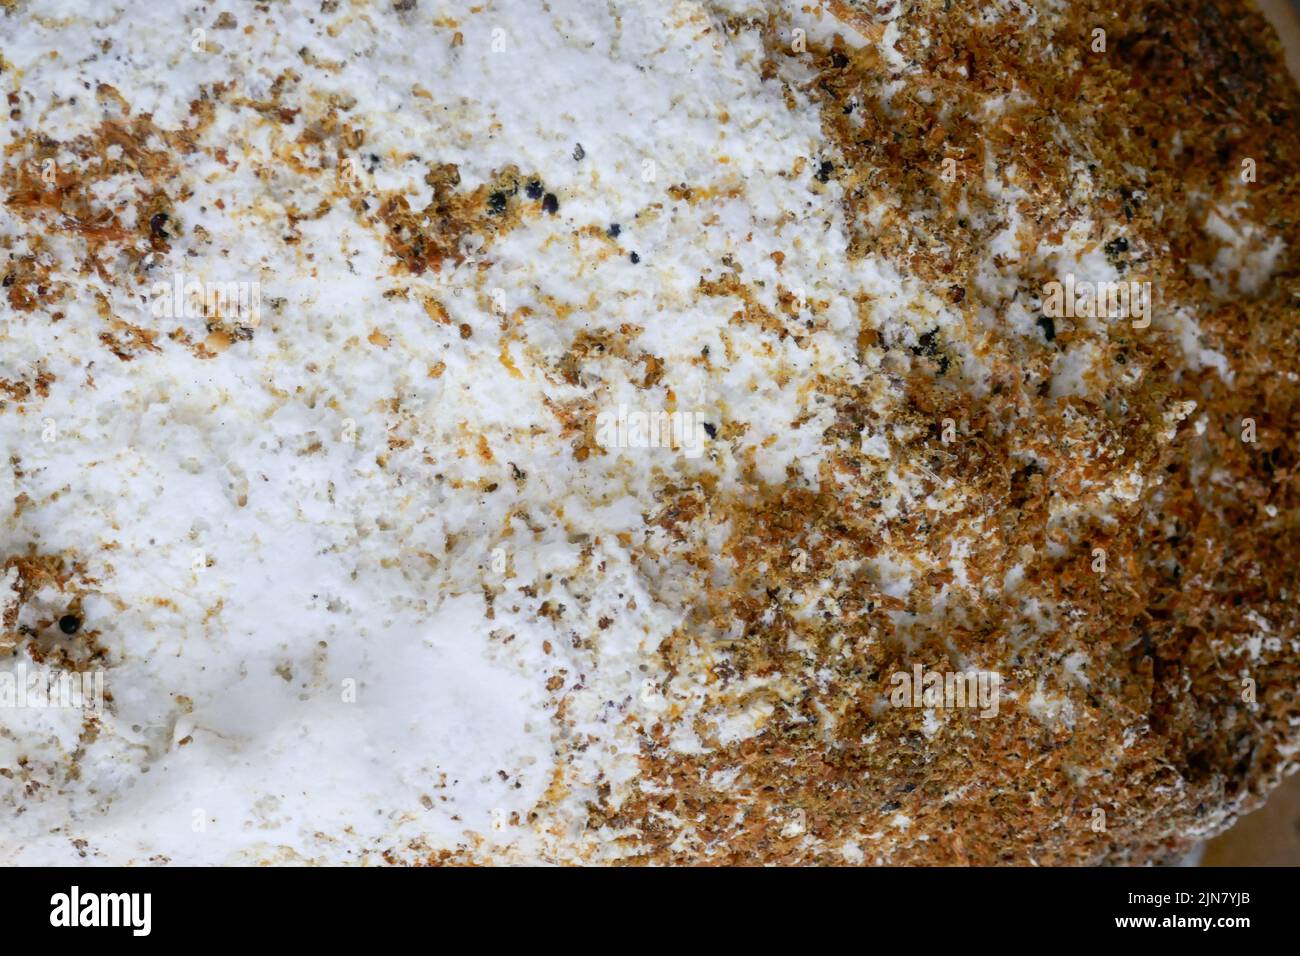 Mold close-up. Gray and brown mold close-up. fungal diseases.Mold fungus wall surface. Mold and fungus problem Stock Photo